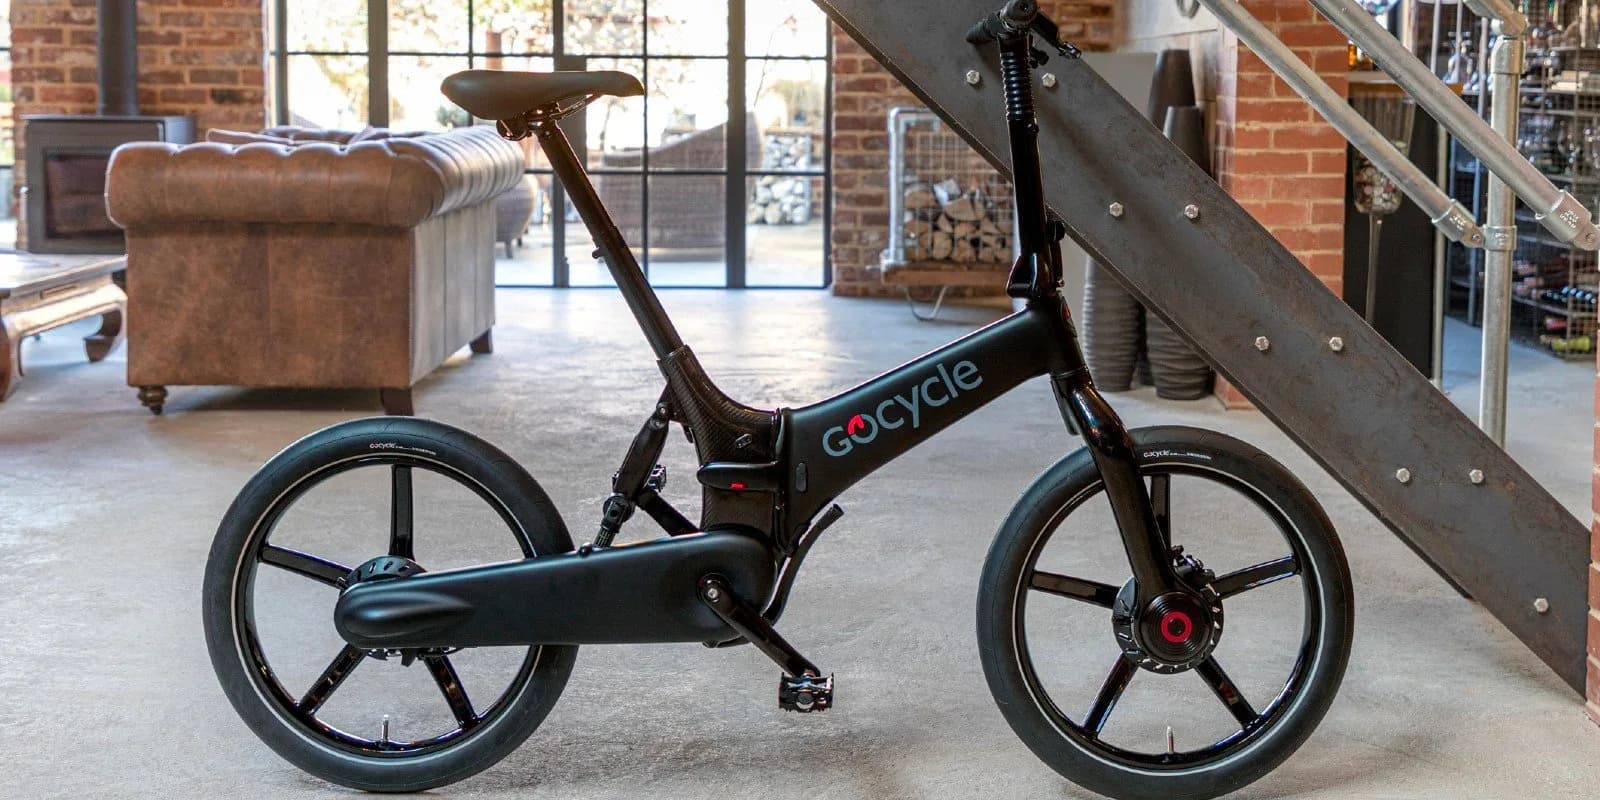 It's not even November but these major electric bike companies 